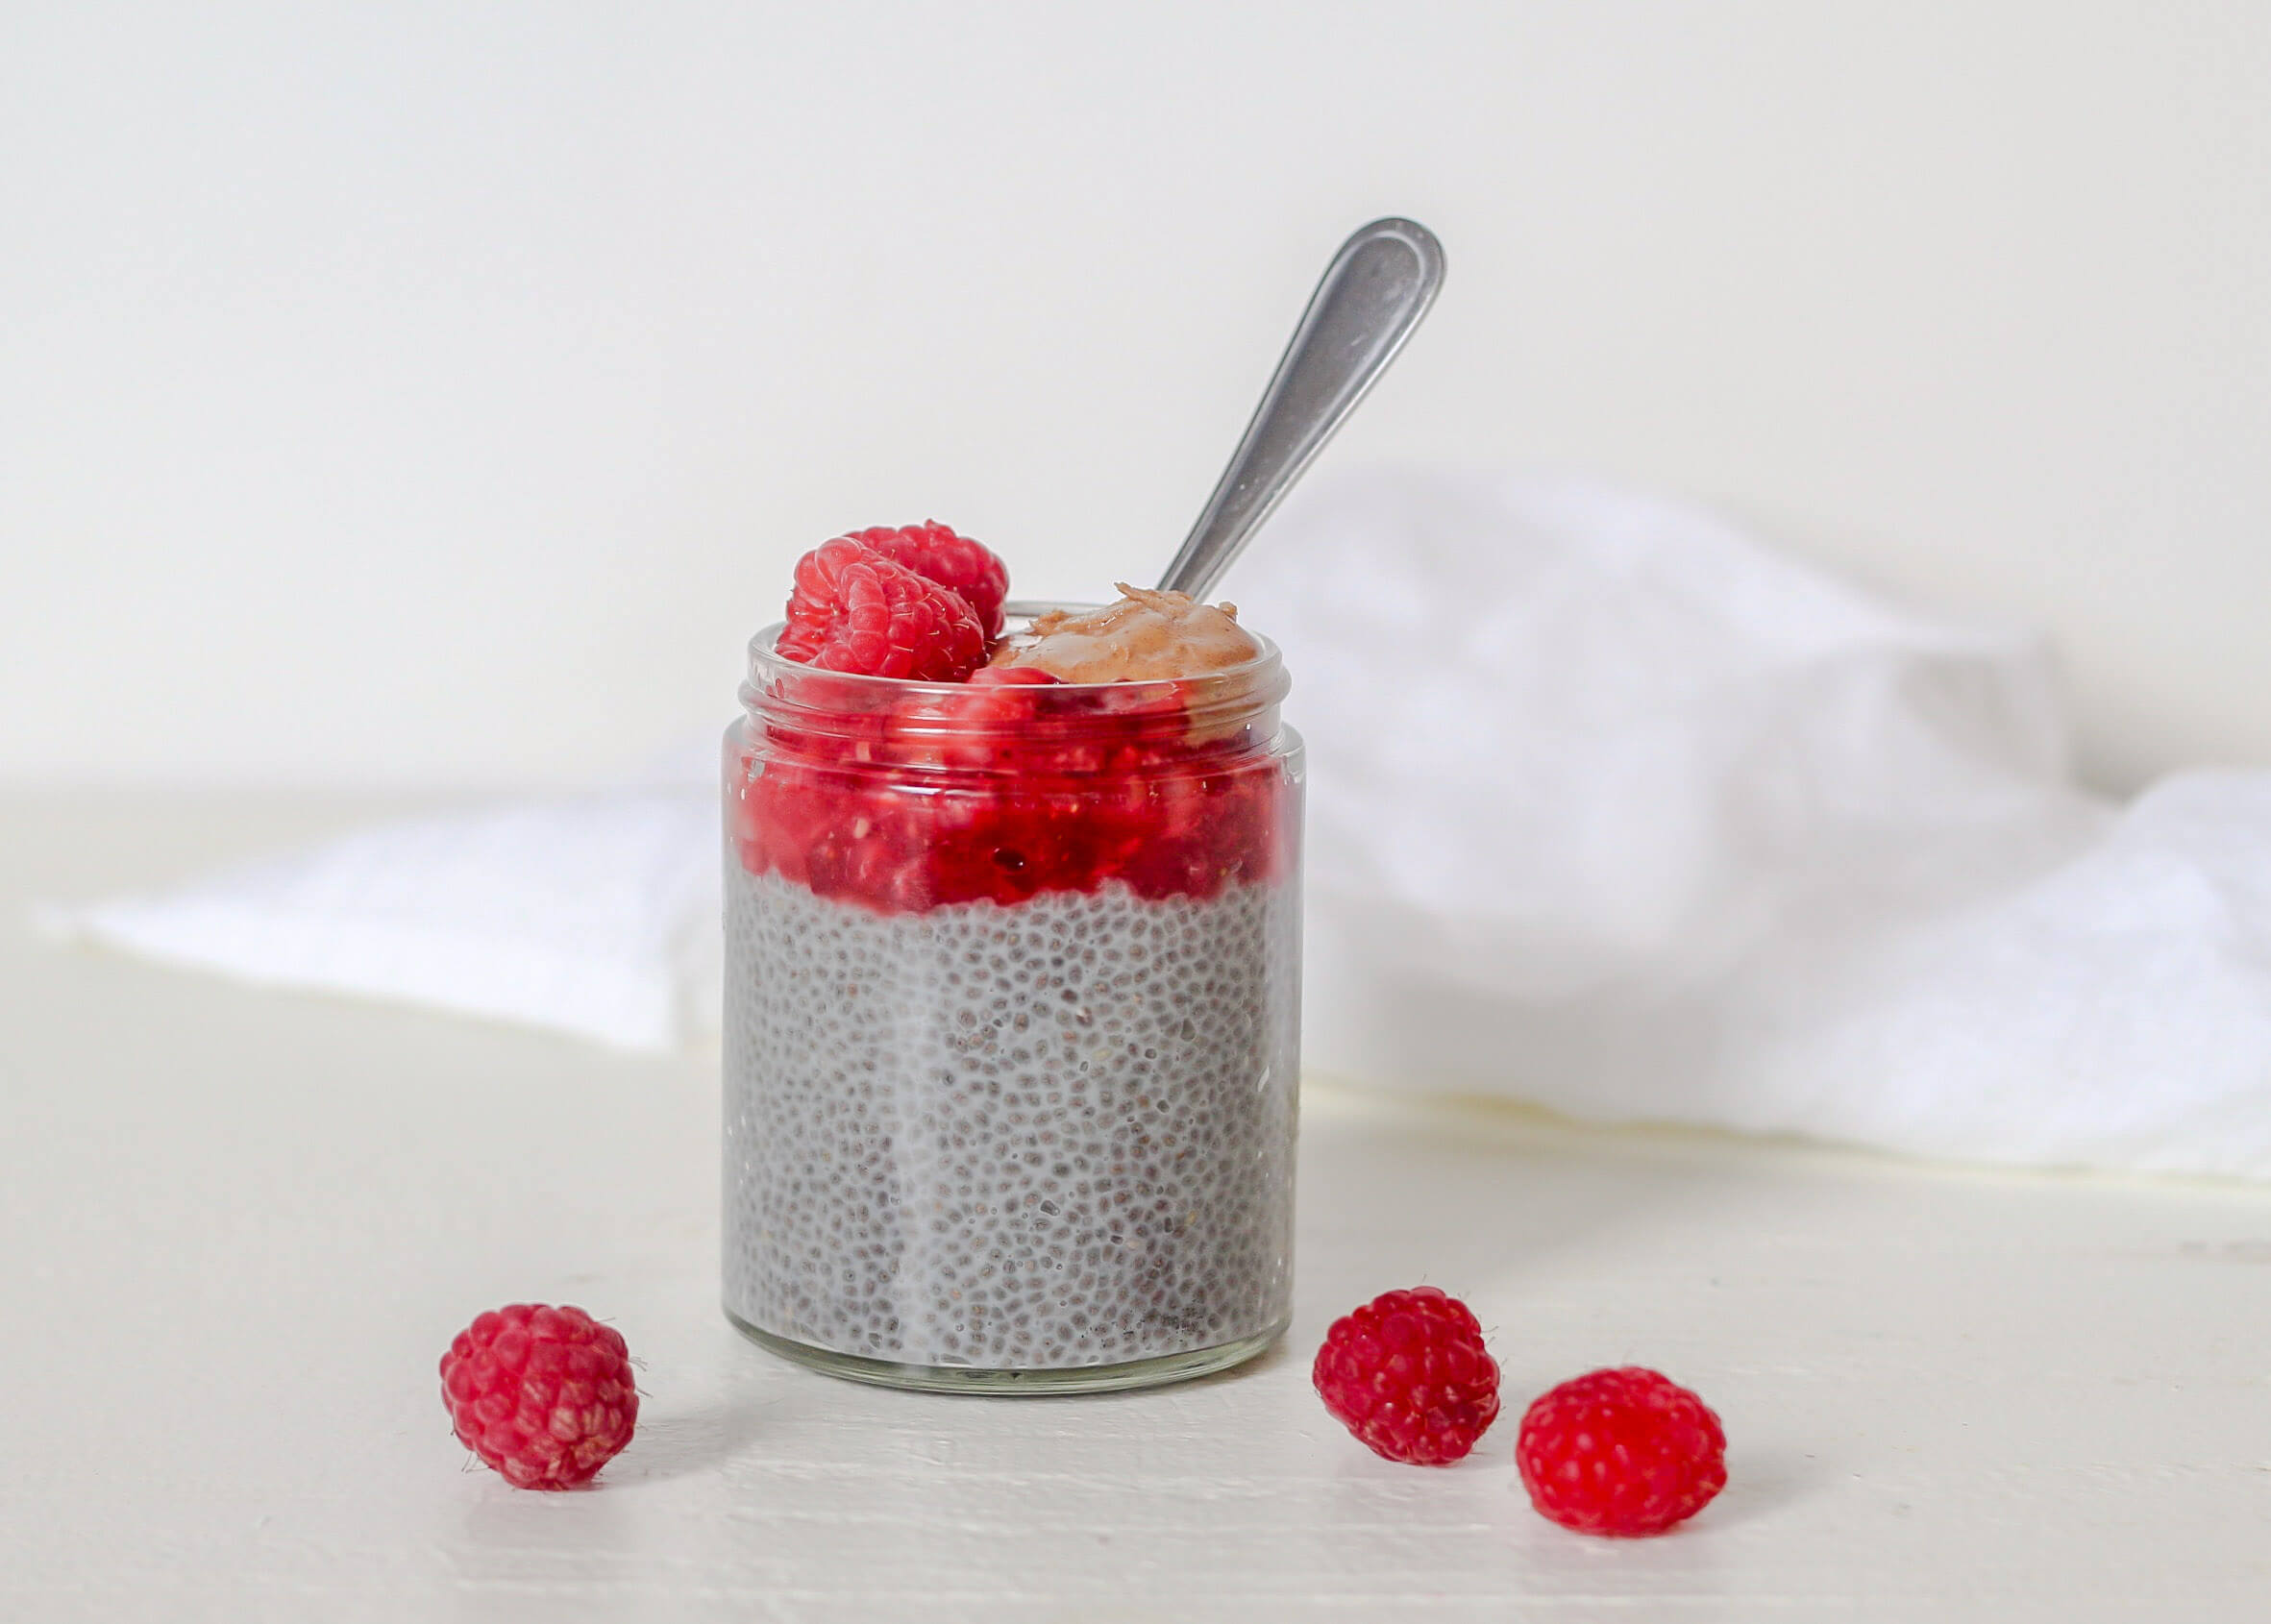 5 Ingredient Meal Ideas Your Clients Will Love: Almond Butter & Jam Chia Pudding